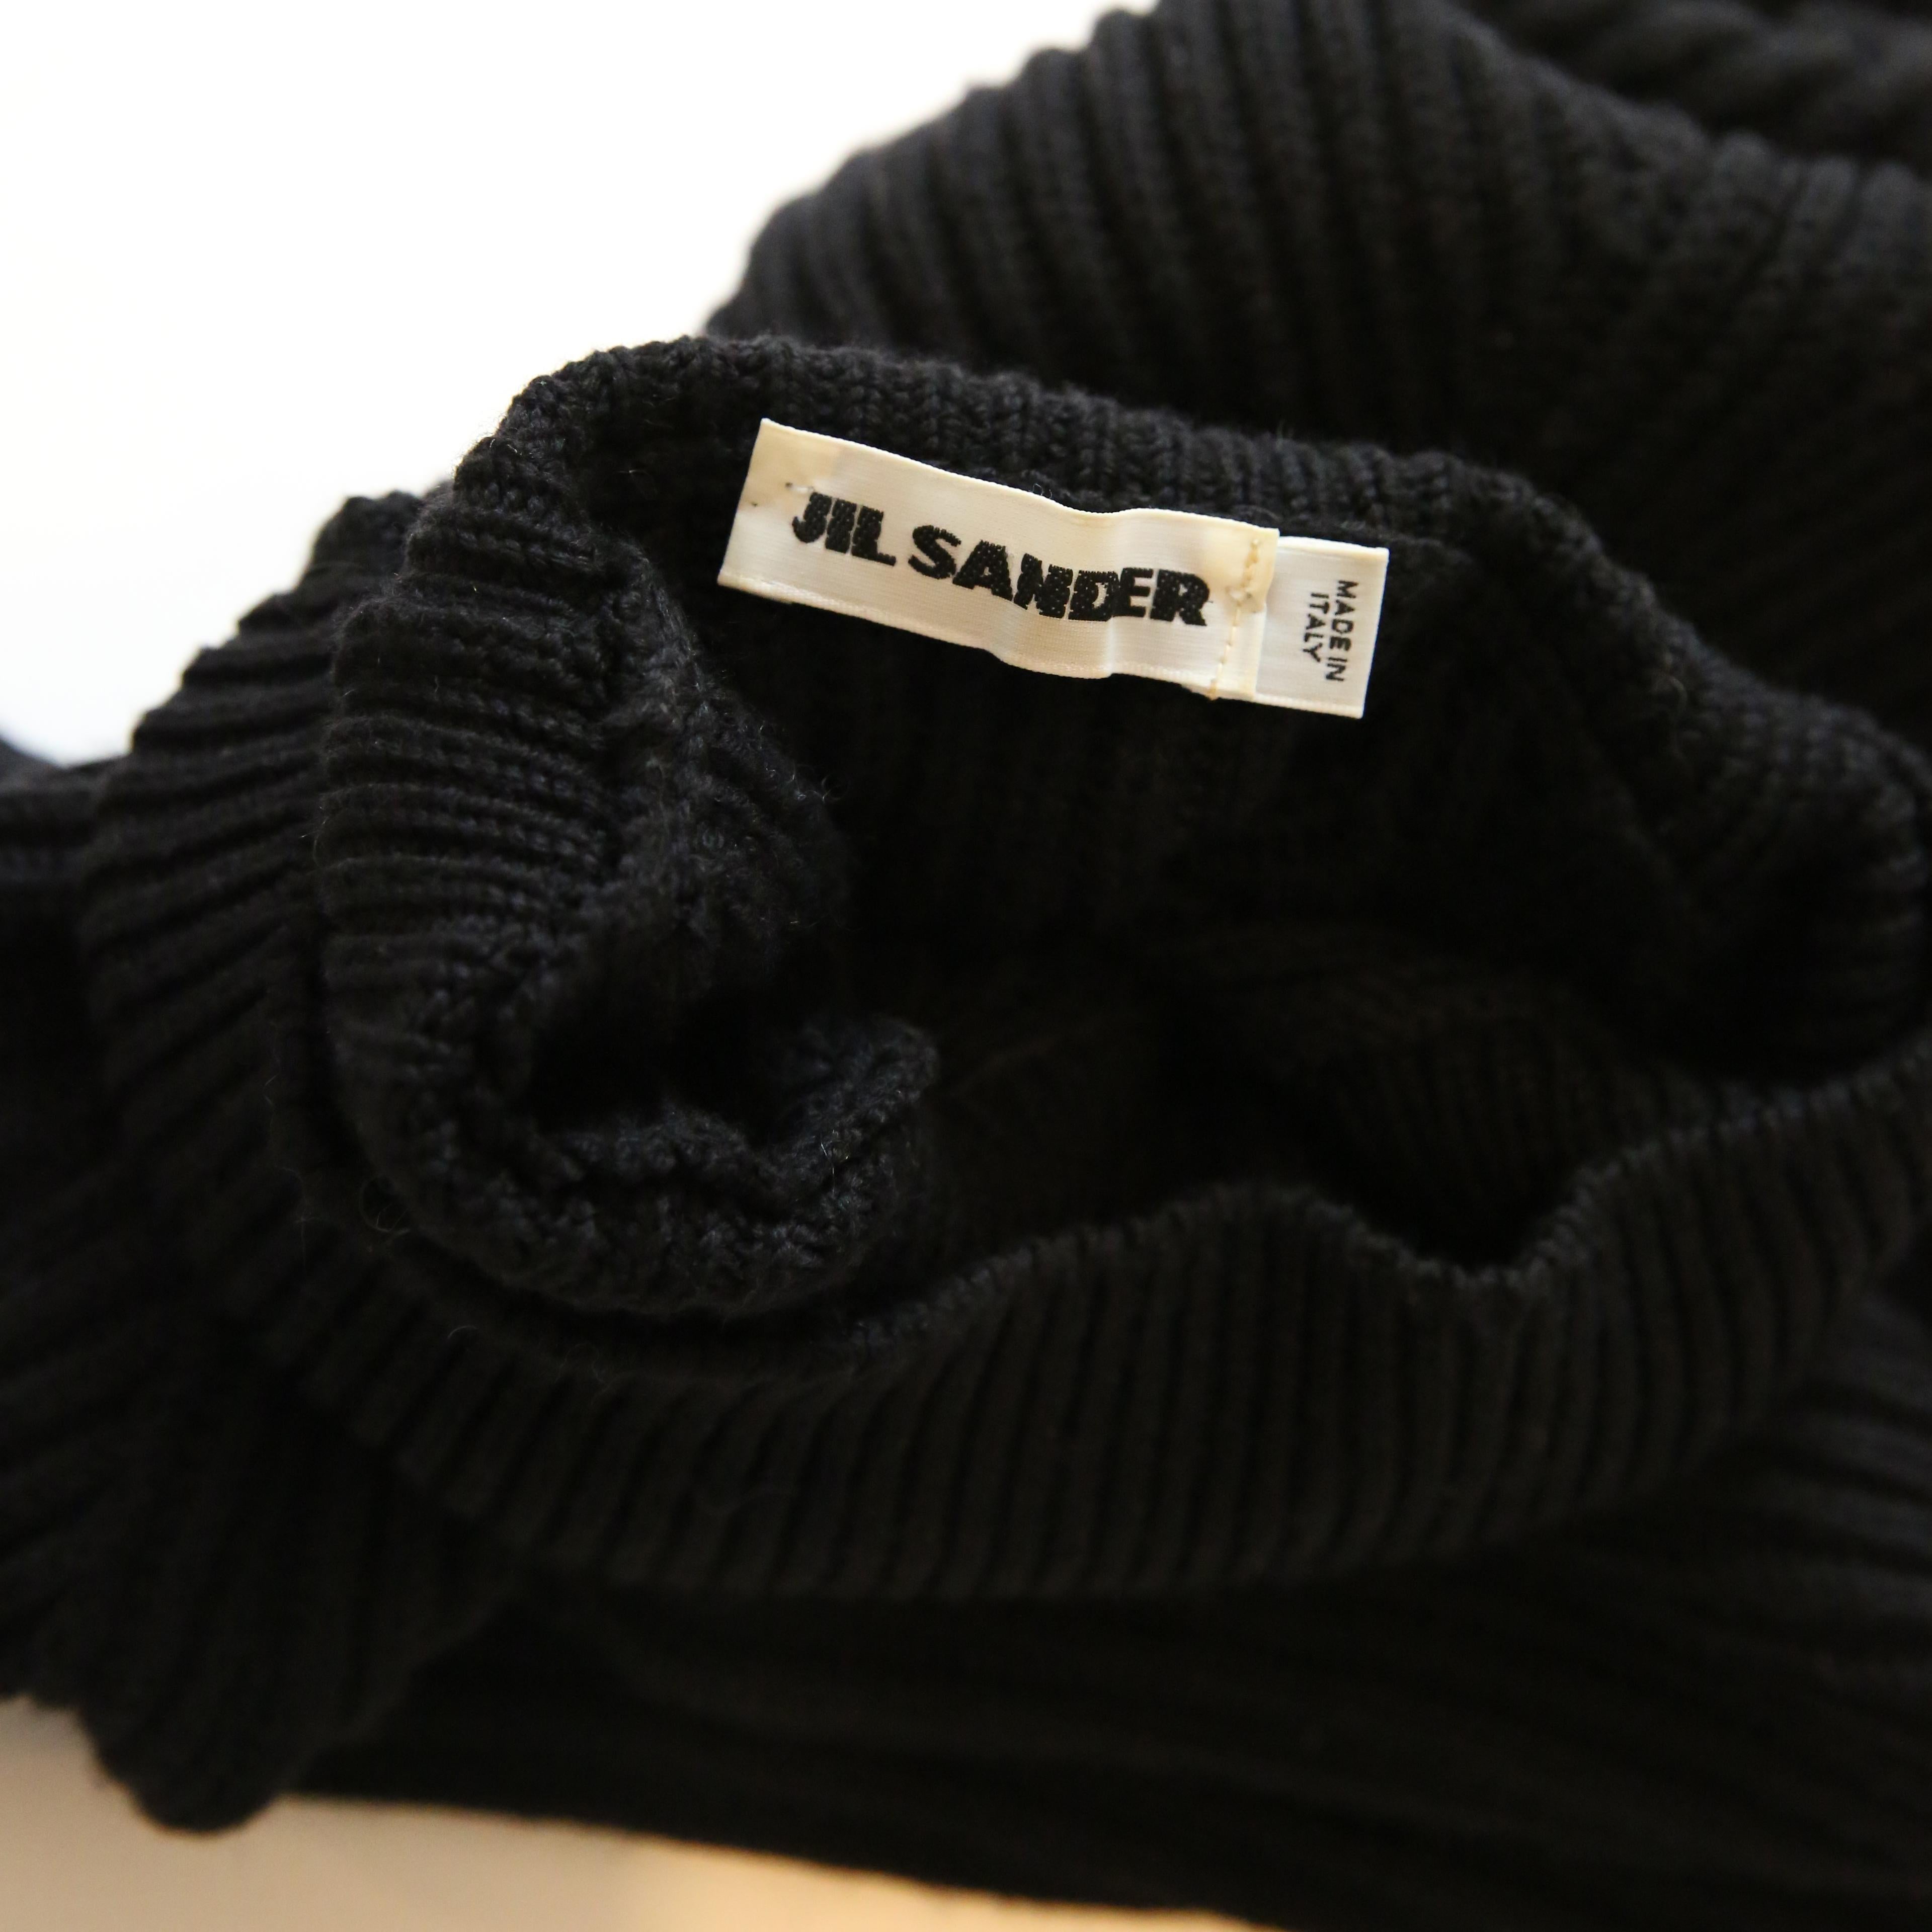 Jil Sander black oversized cropped roll neck sweater
Chunky knit

Composition:
The composition label is faded, but I believe it reads cashmere/wool

Size:
IT 40

In excellent condition 

Measurements:
Bust 42